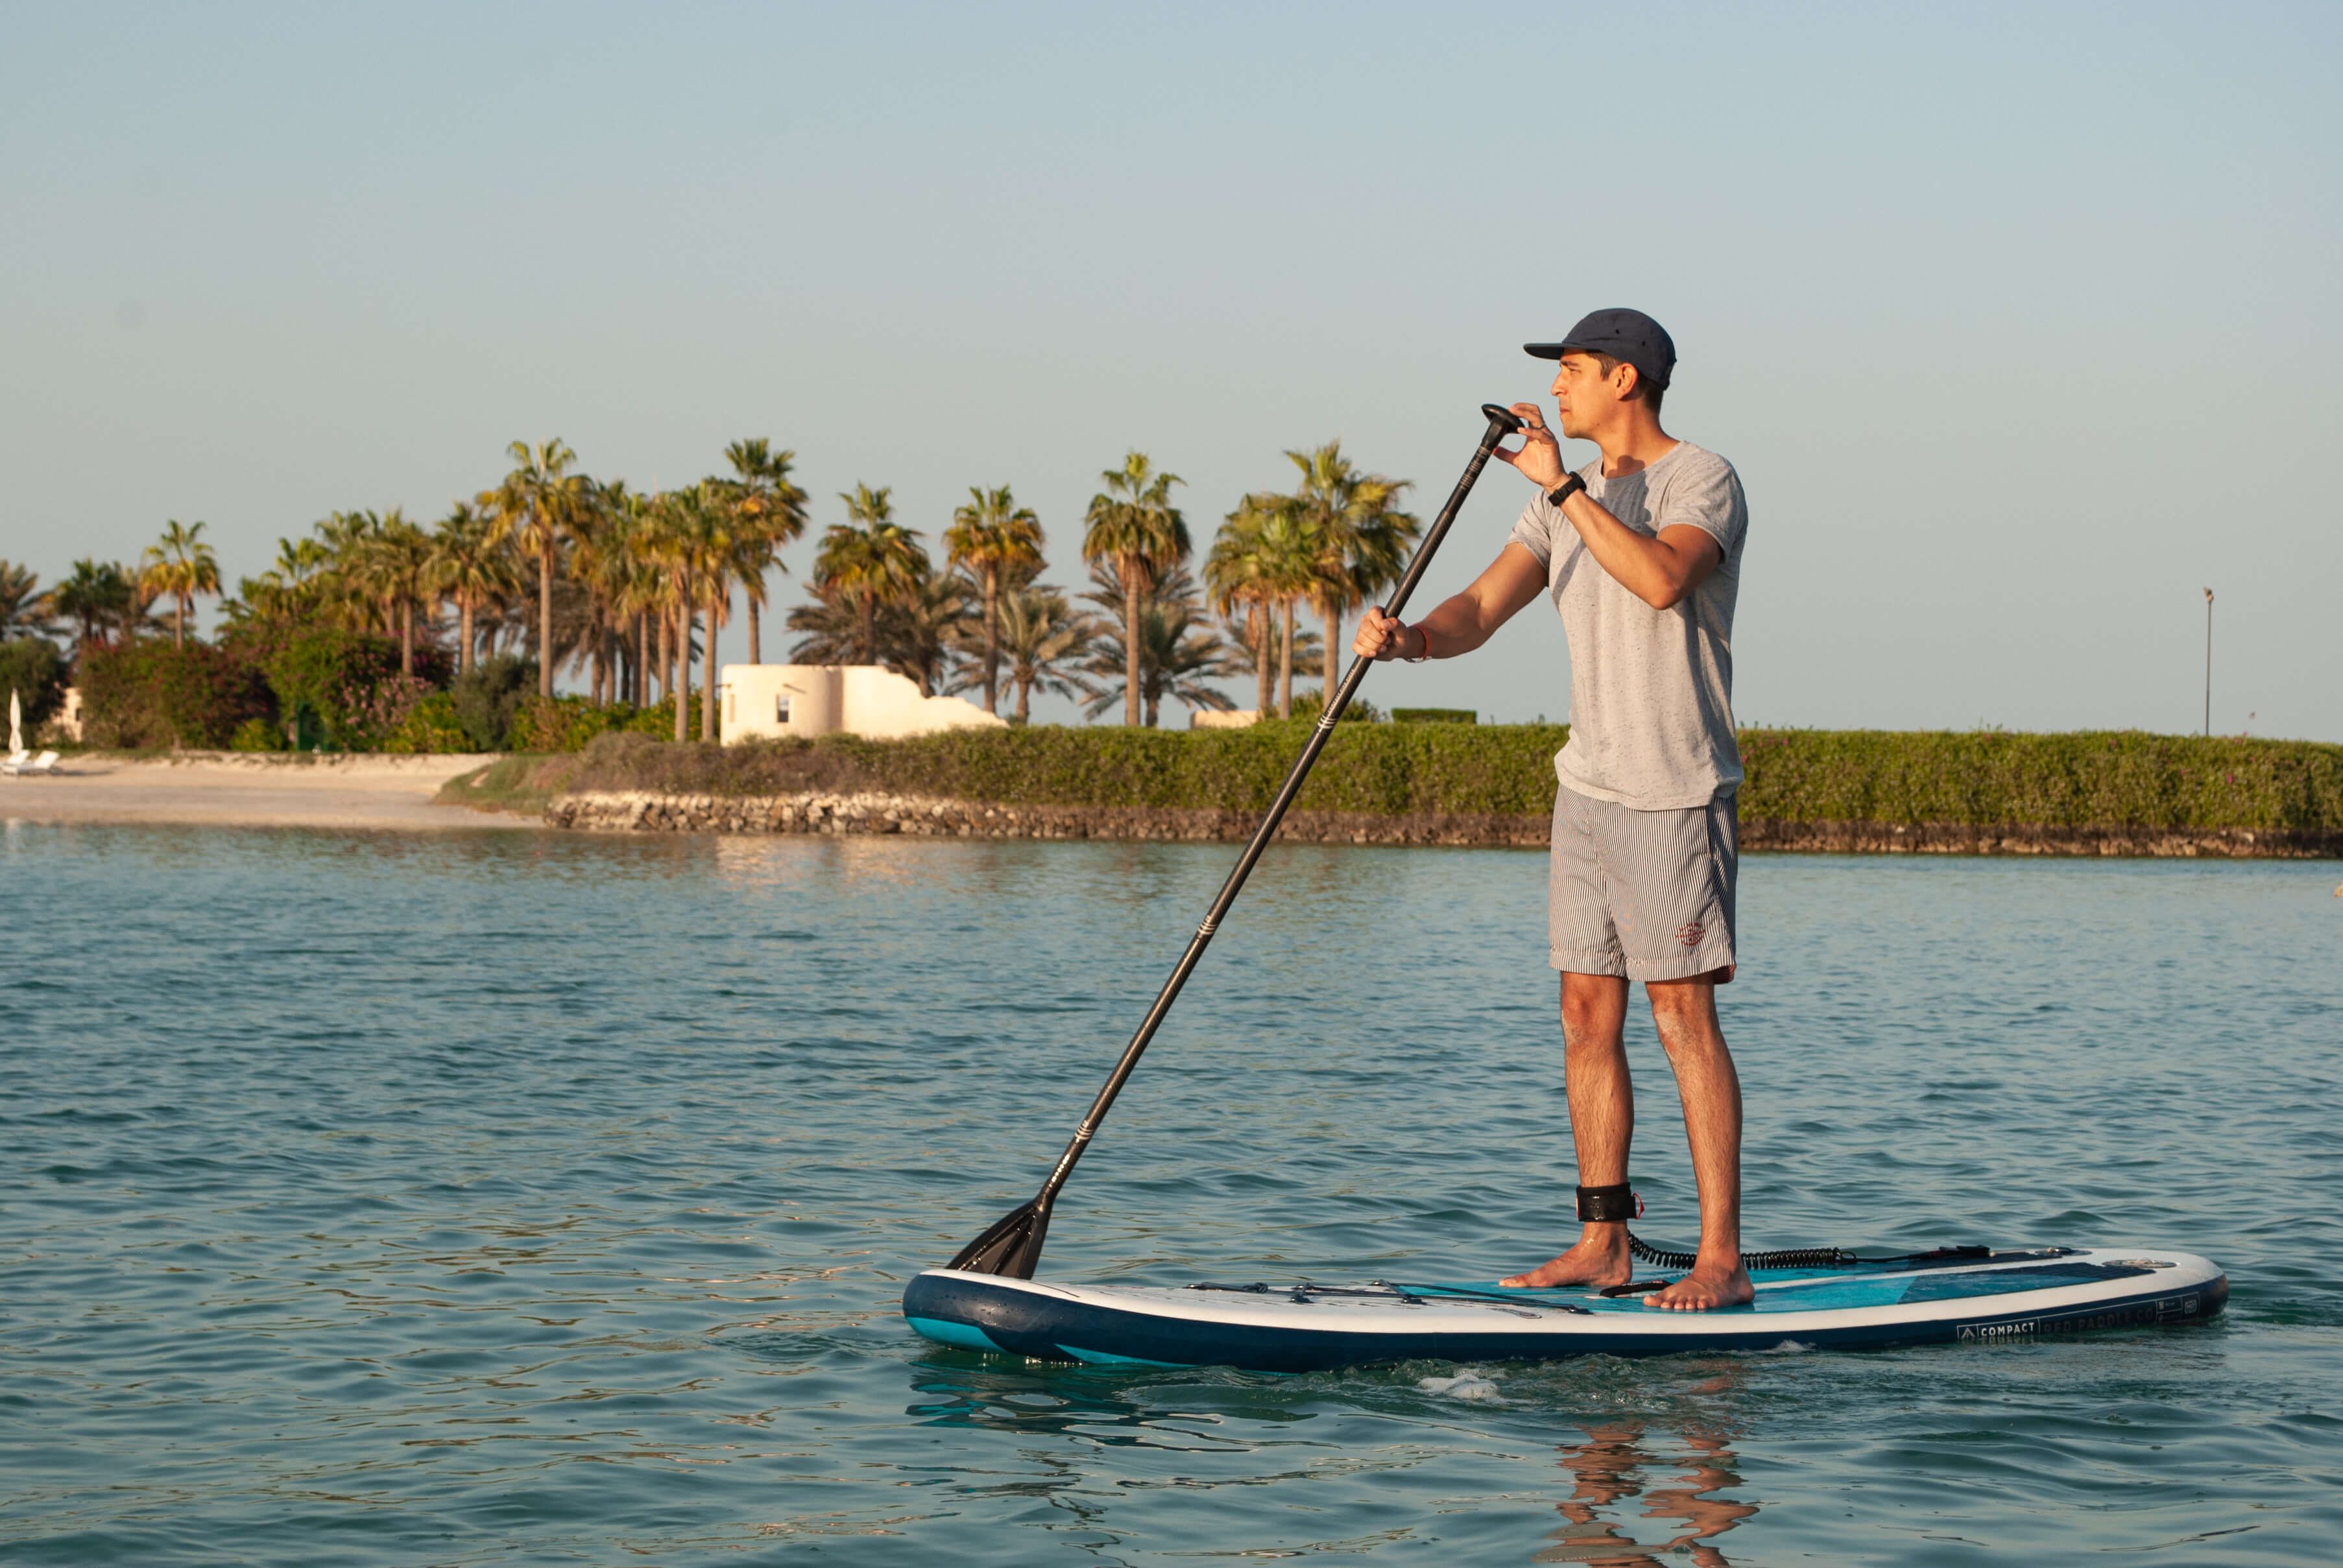 man paddle boarding in the sea with palm trees in the background